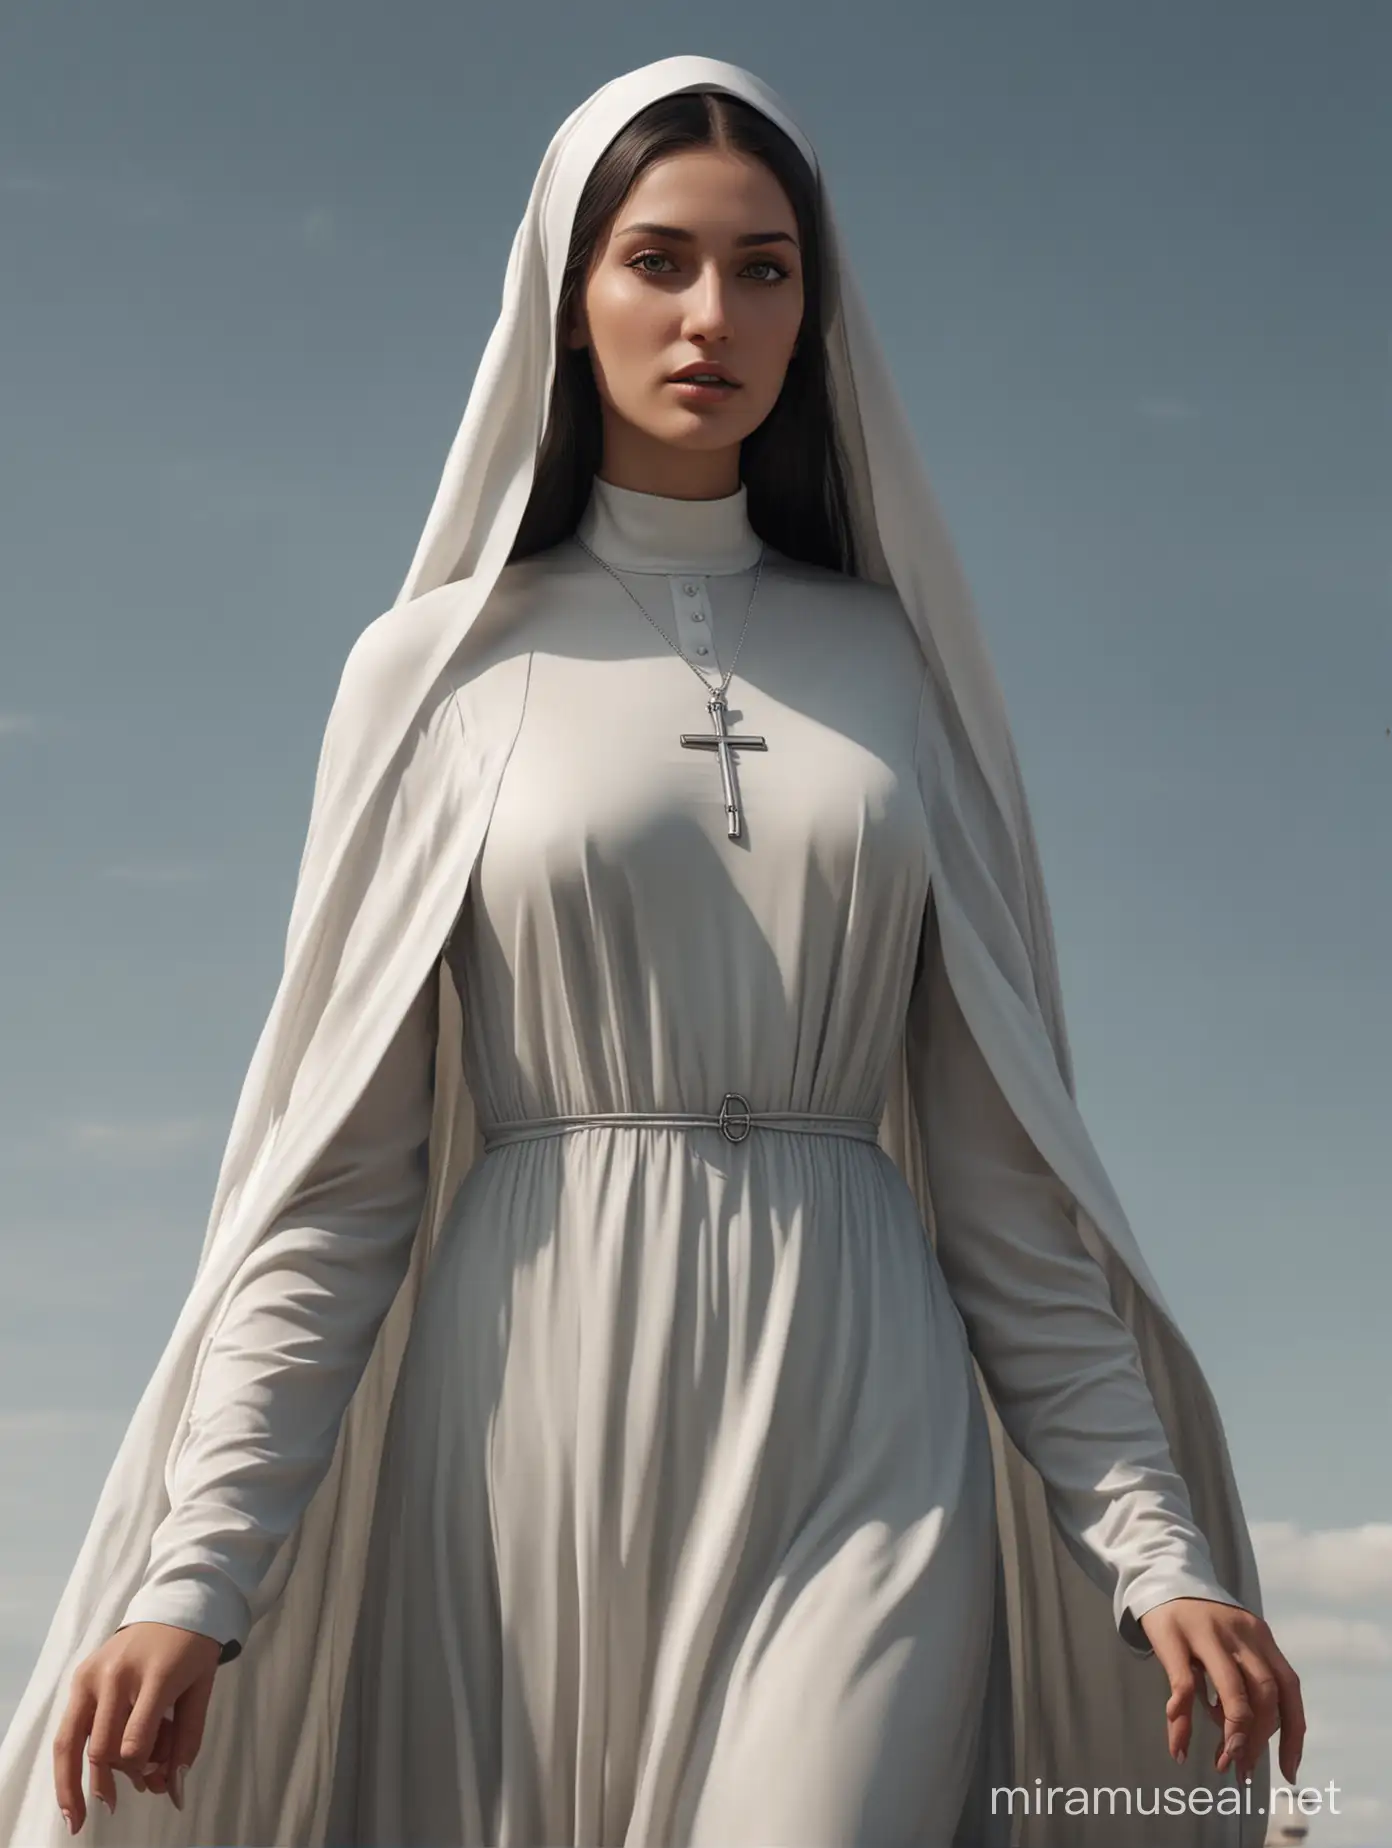 A seductive nun, with a long veil, a maxi silk dress fluttering in the wind, a realistic symmetrical face, realistic eyes, a realistic nose, realistic hands, and realistic toes, upscaled to 8k